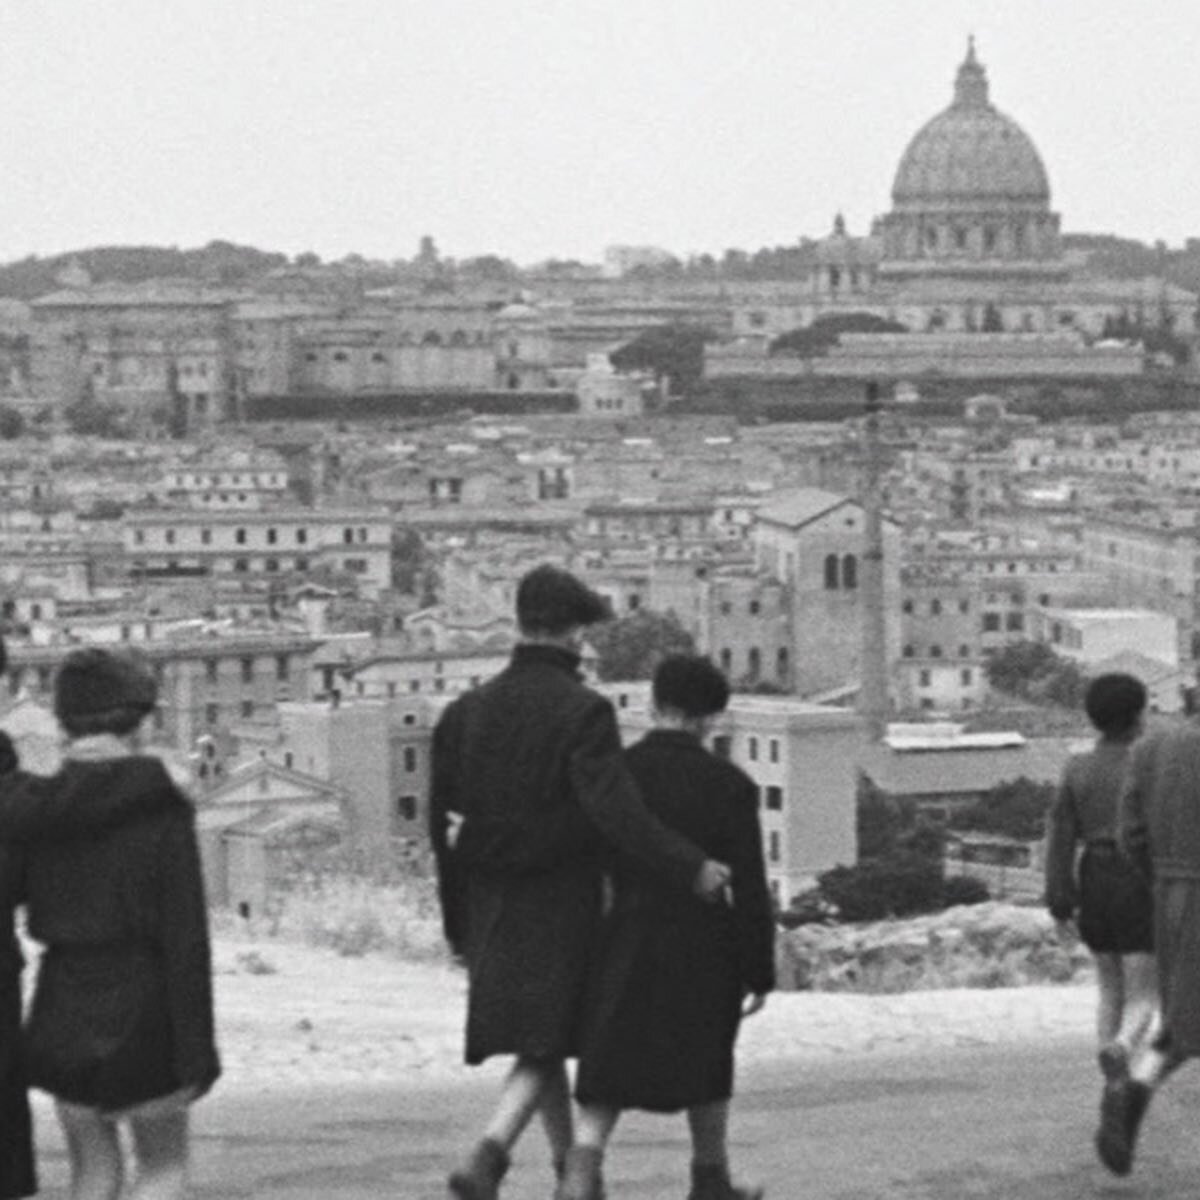 For a much needed post-Academy Awards palate cleanser, we returned to &lsquo;Rome, Open City,&rsquo; one of Italian cinema&rsquo;s most-celebrated films. Click the link in our bio for the full feature!
#filmcritic #rossellini #italy🇮🇹